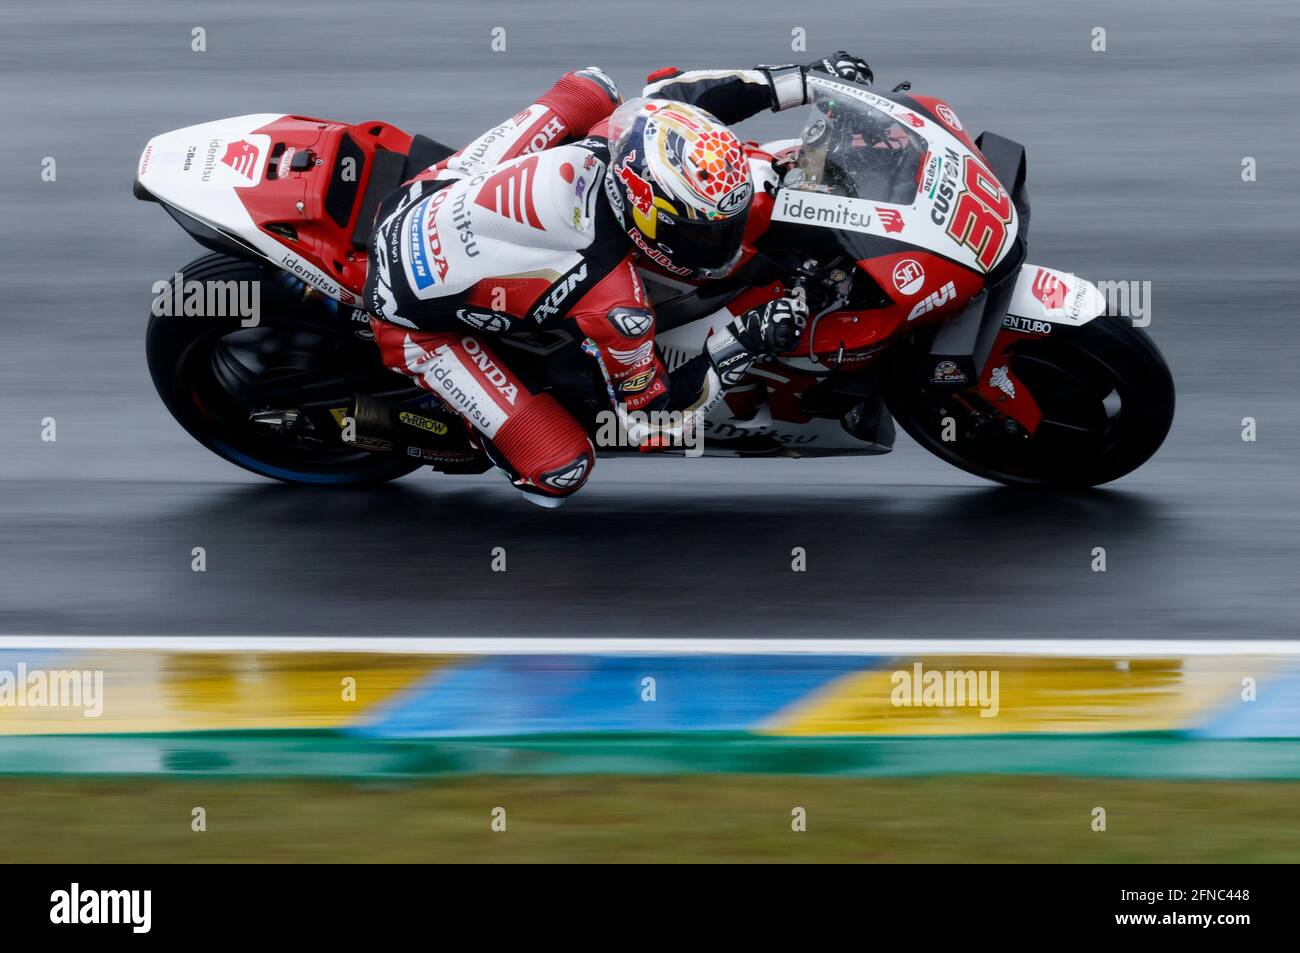 MotoGP - French Grand Prix - Circuit Bugatti, Le Mans, France - May 16,  2021 LCR Honda IDEMITSU'S Takaaki Nakagami in action during the MotoGP race  REUTERS/Stephane Mahe Stock Photo - Alamy